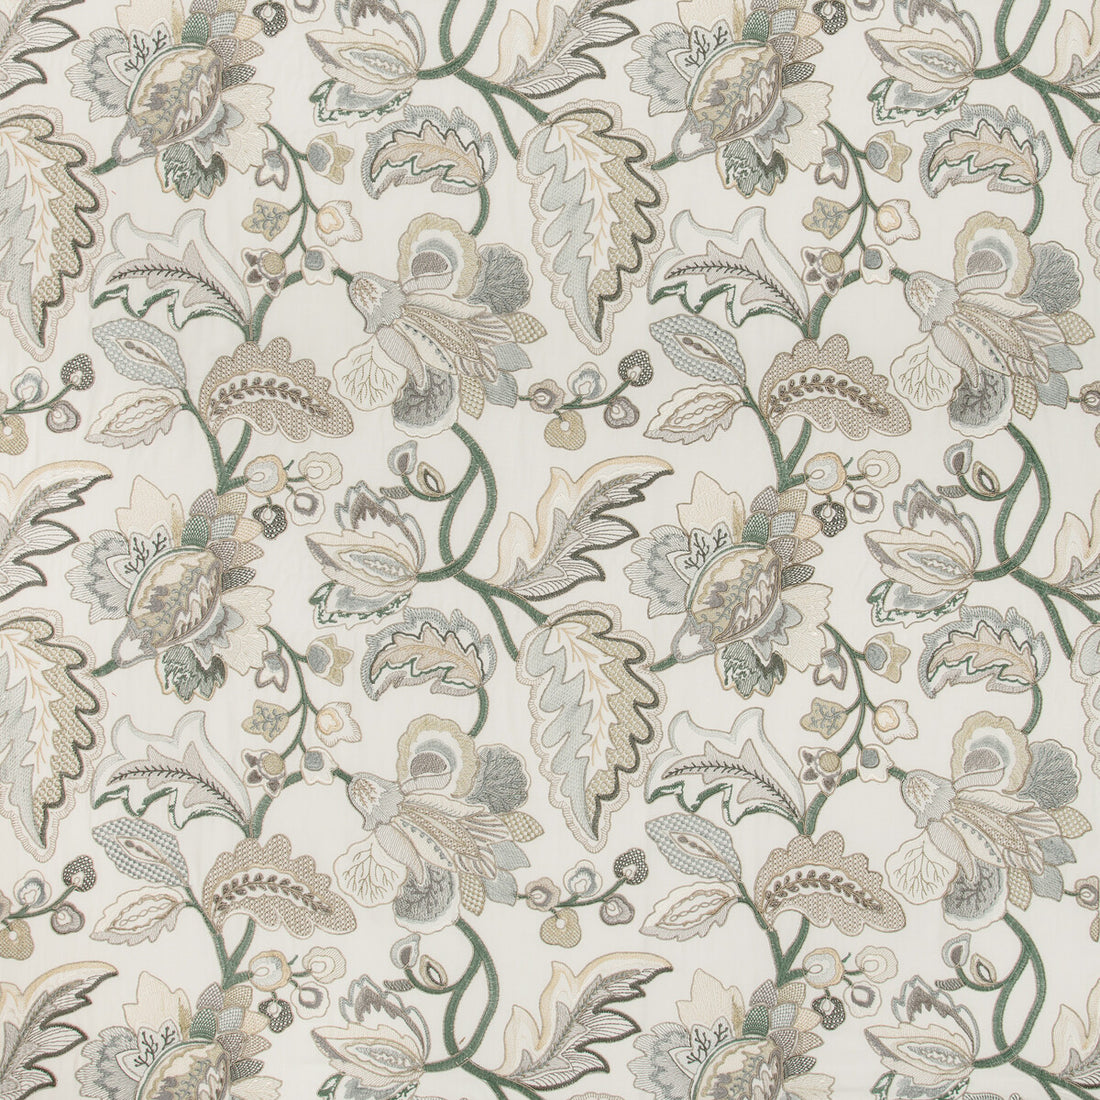 Orford Embroidery fabric in leaf/mist color - pattern 2019111.135.0 - by Lee Jofa in the Manor House collection